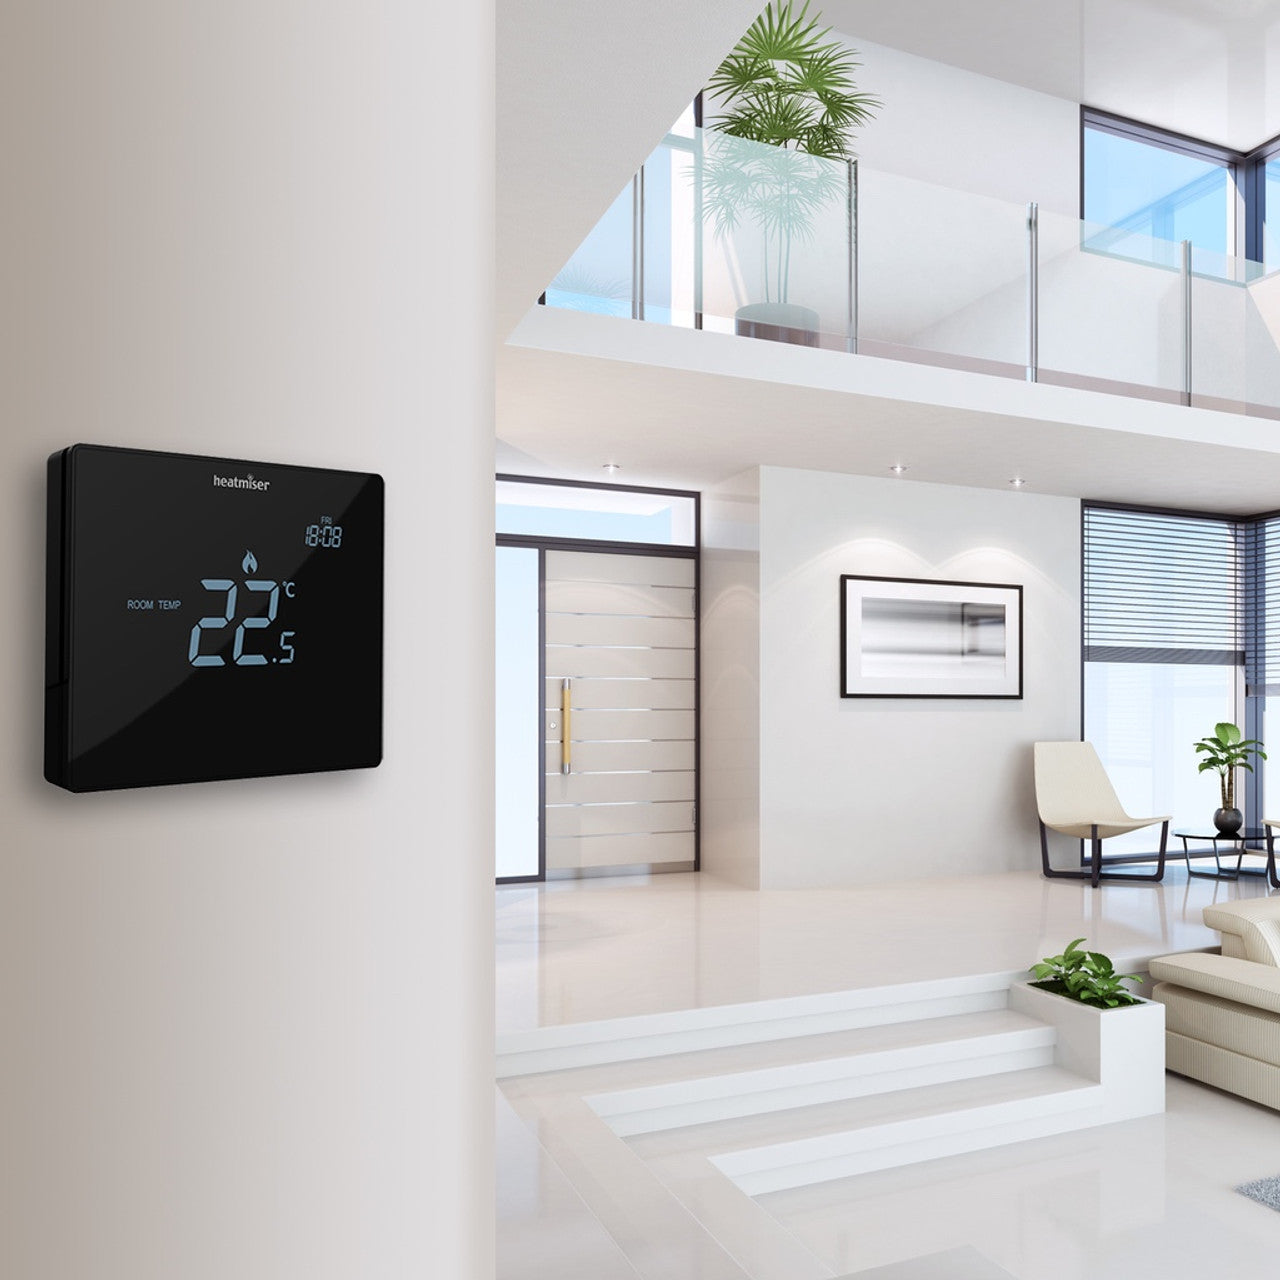 Discover underfloor heating thermostats